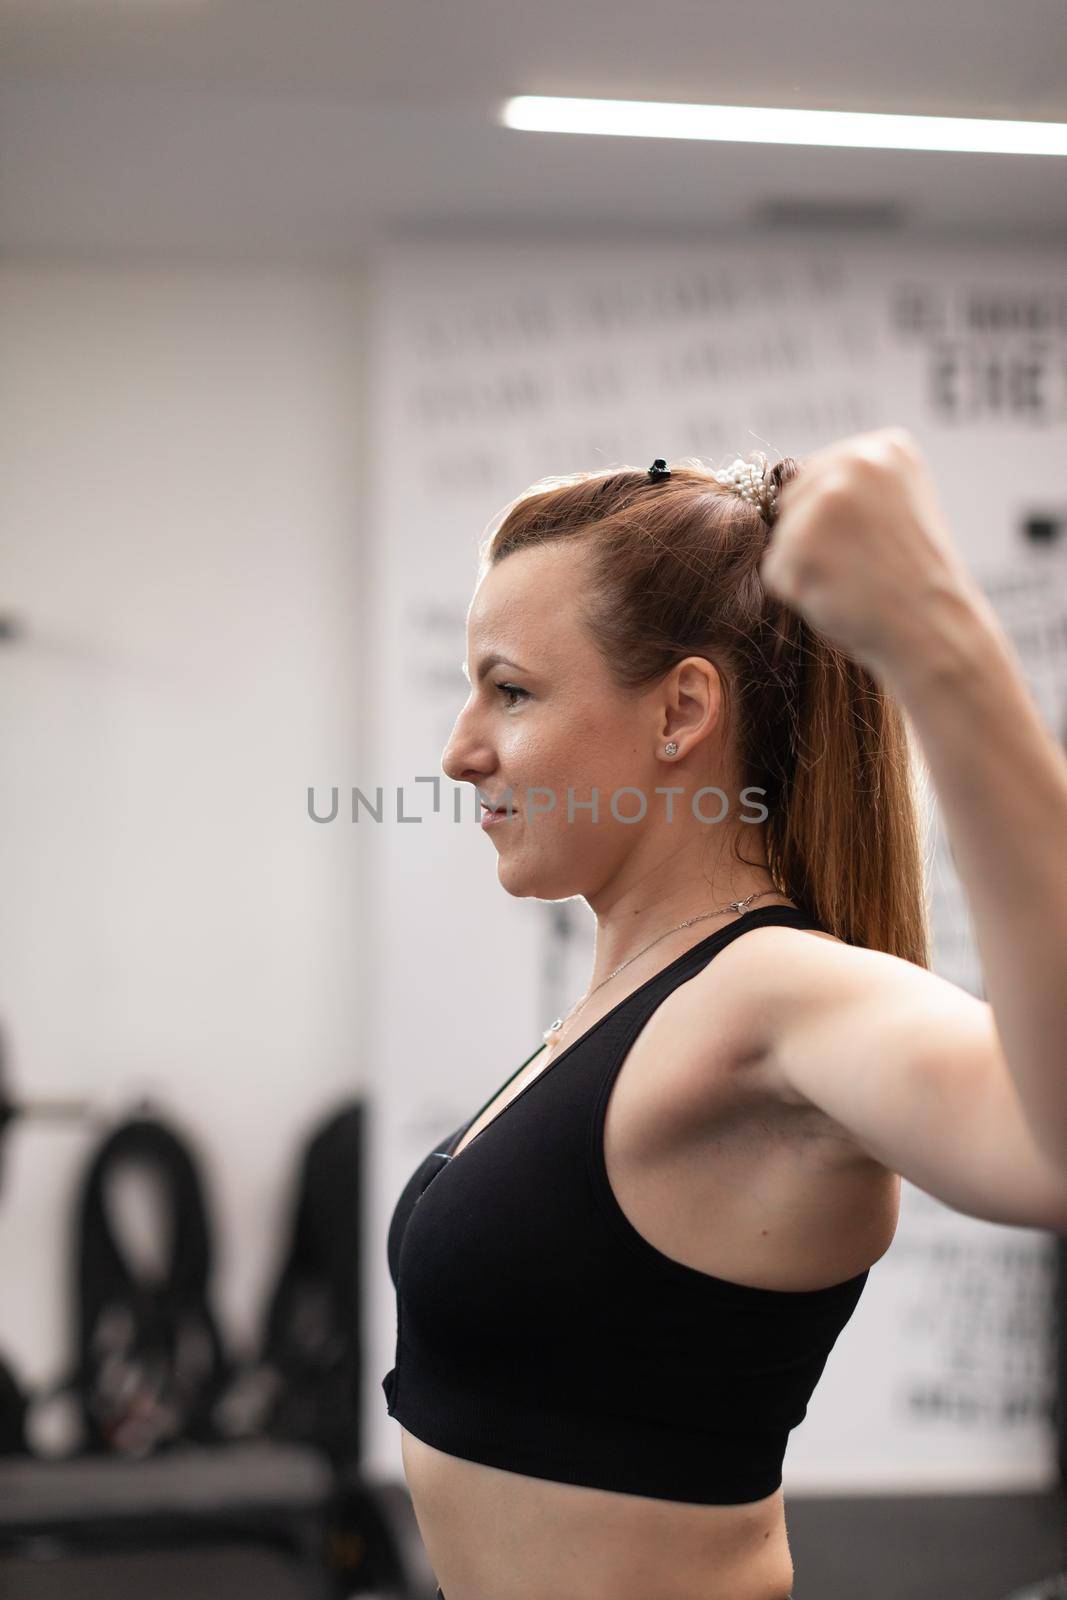 A young woman looks in front of a mirror, while making figures with her arms and muscles to observe how she is improving her physical shape at the local sport and fitness center